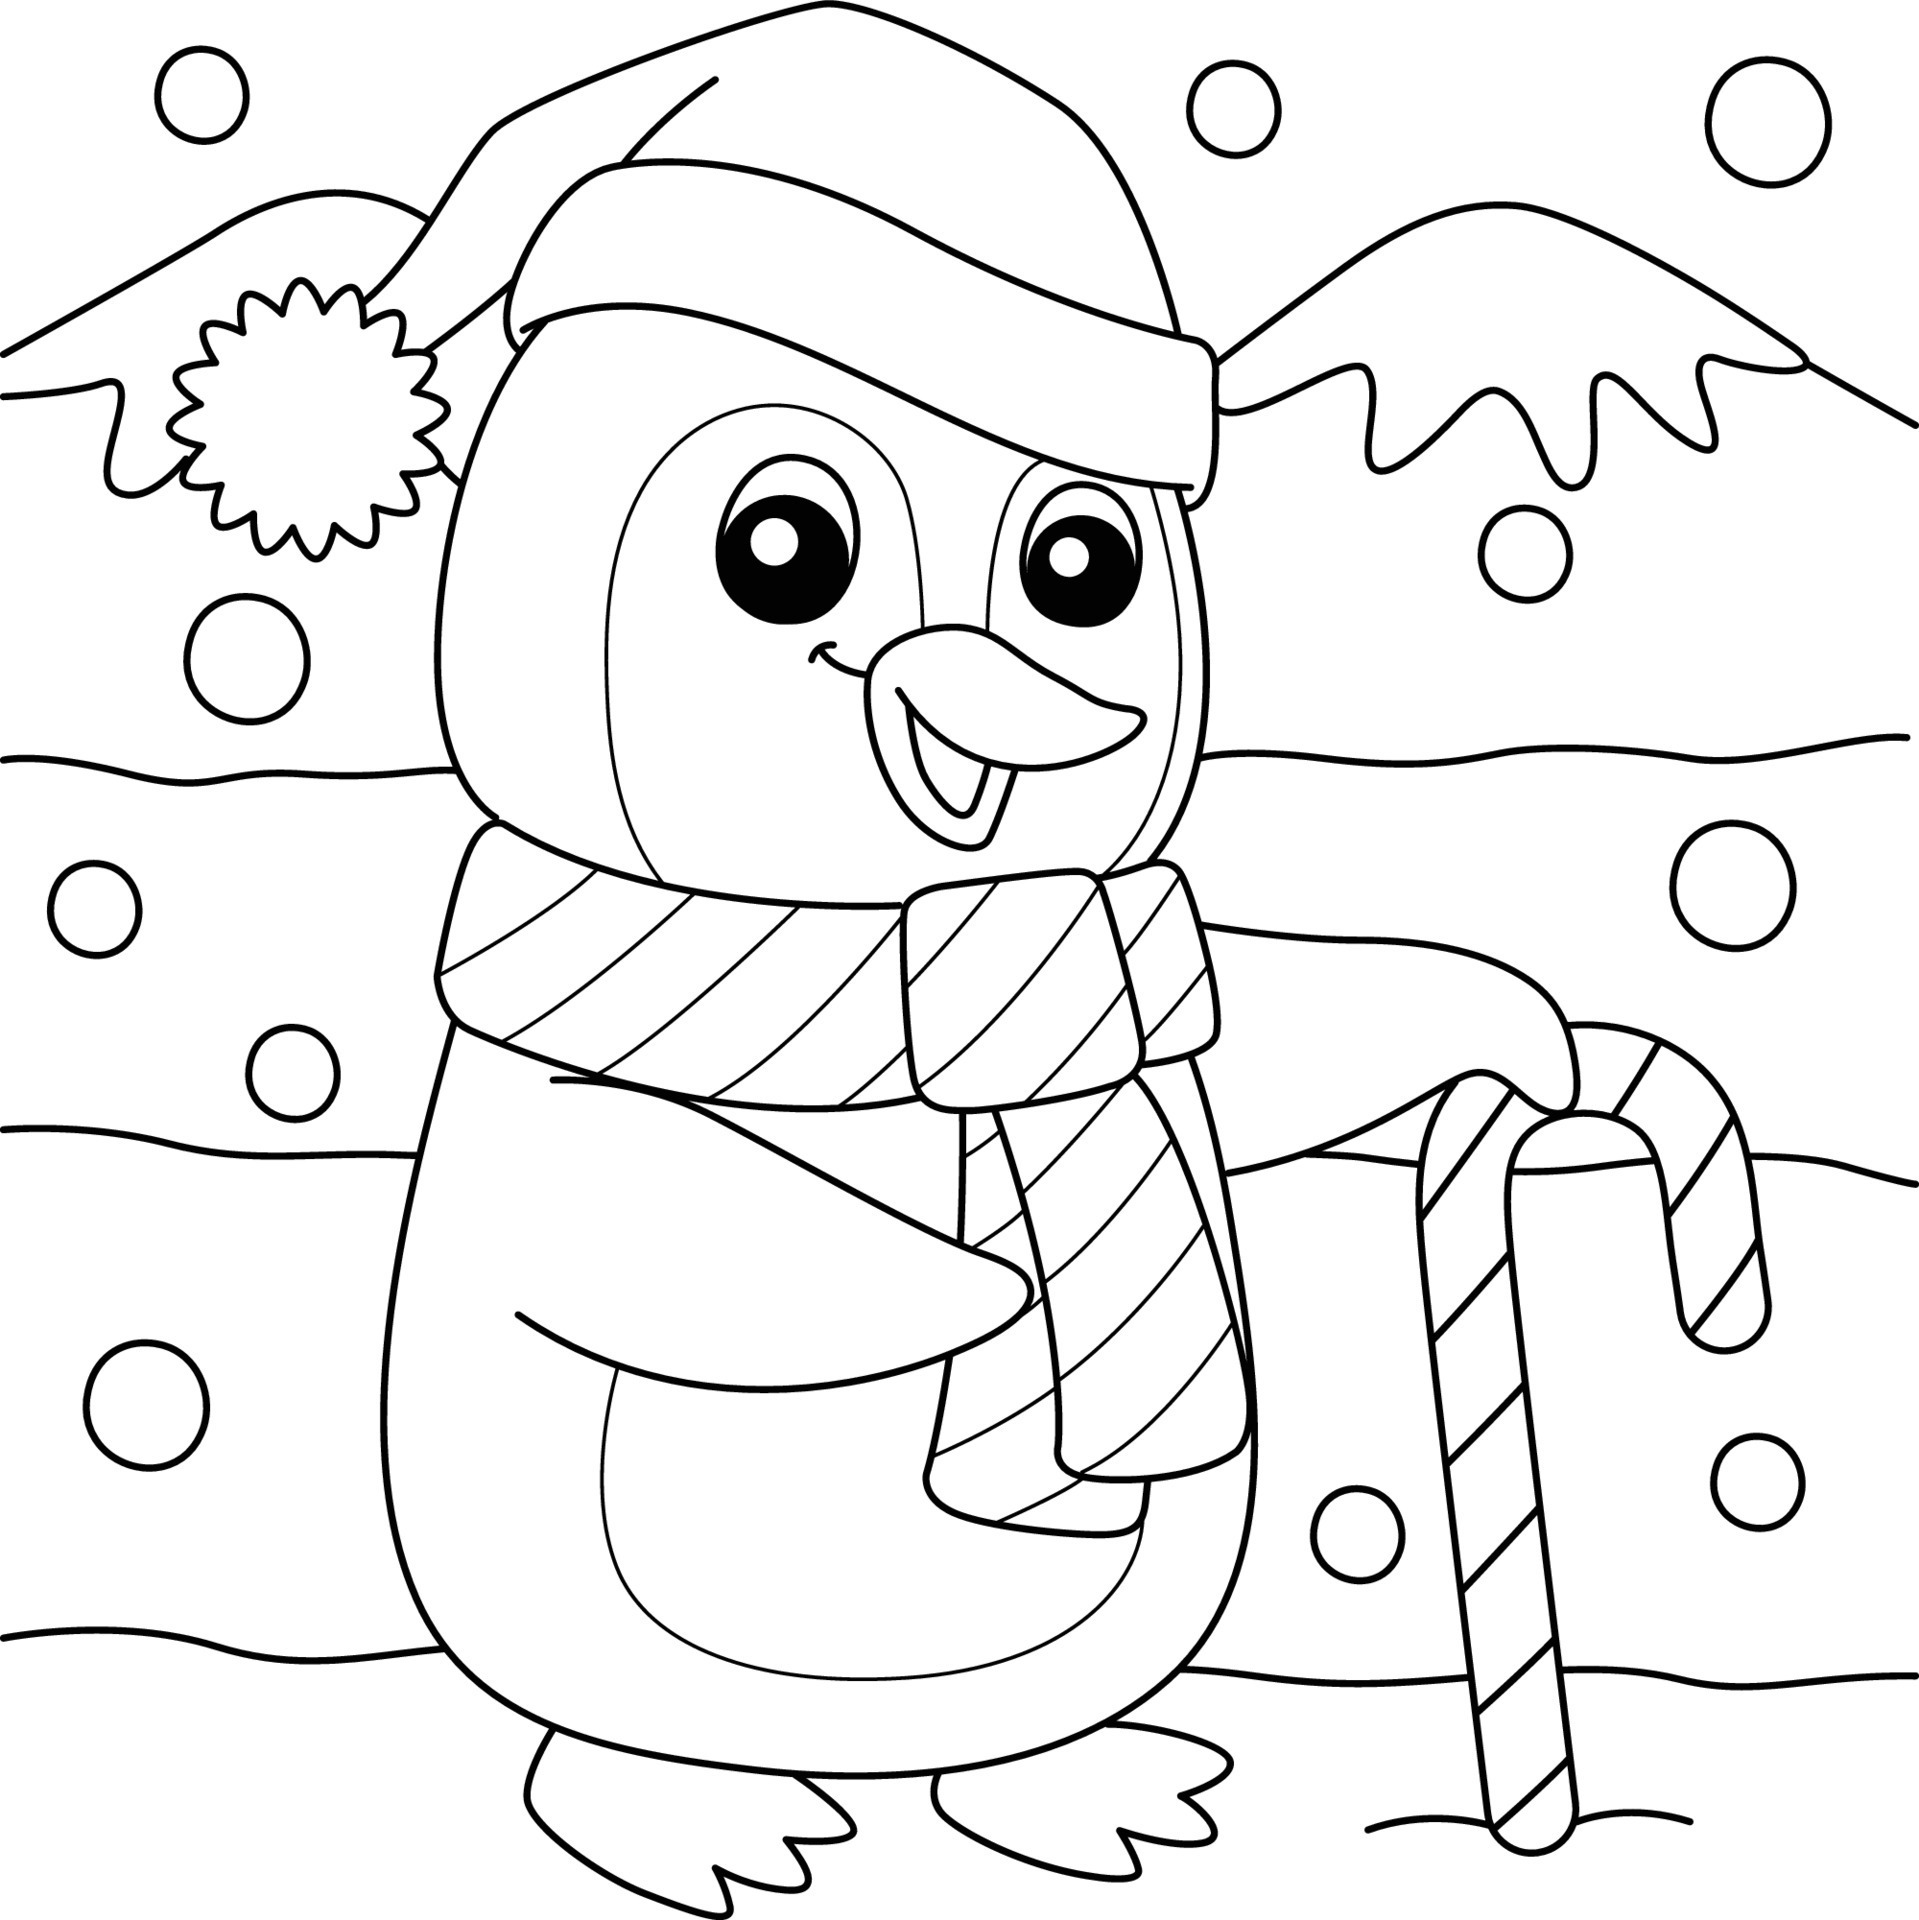 Printable Christmas Penguin  sheet Coloring Page for kids.